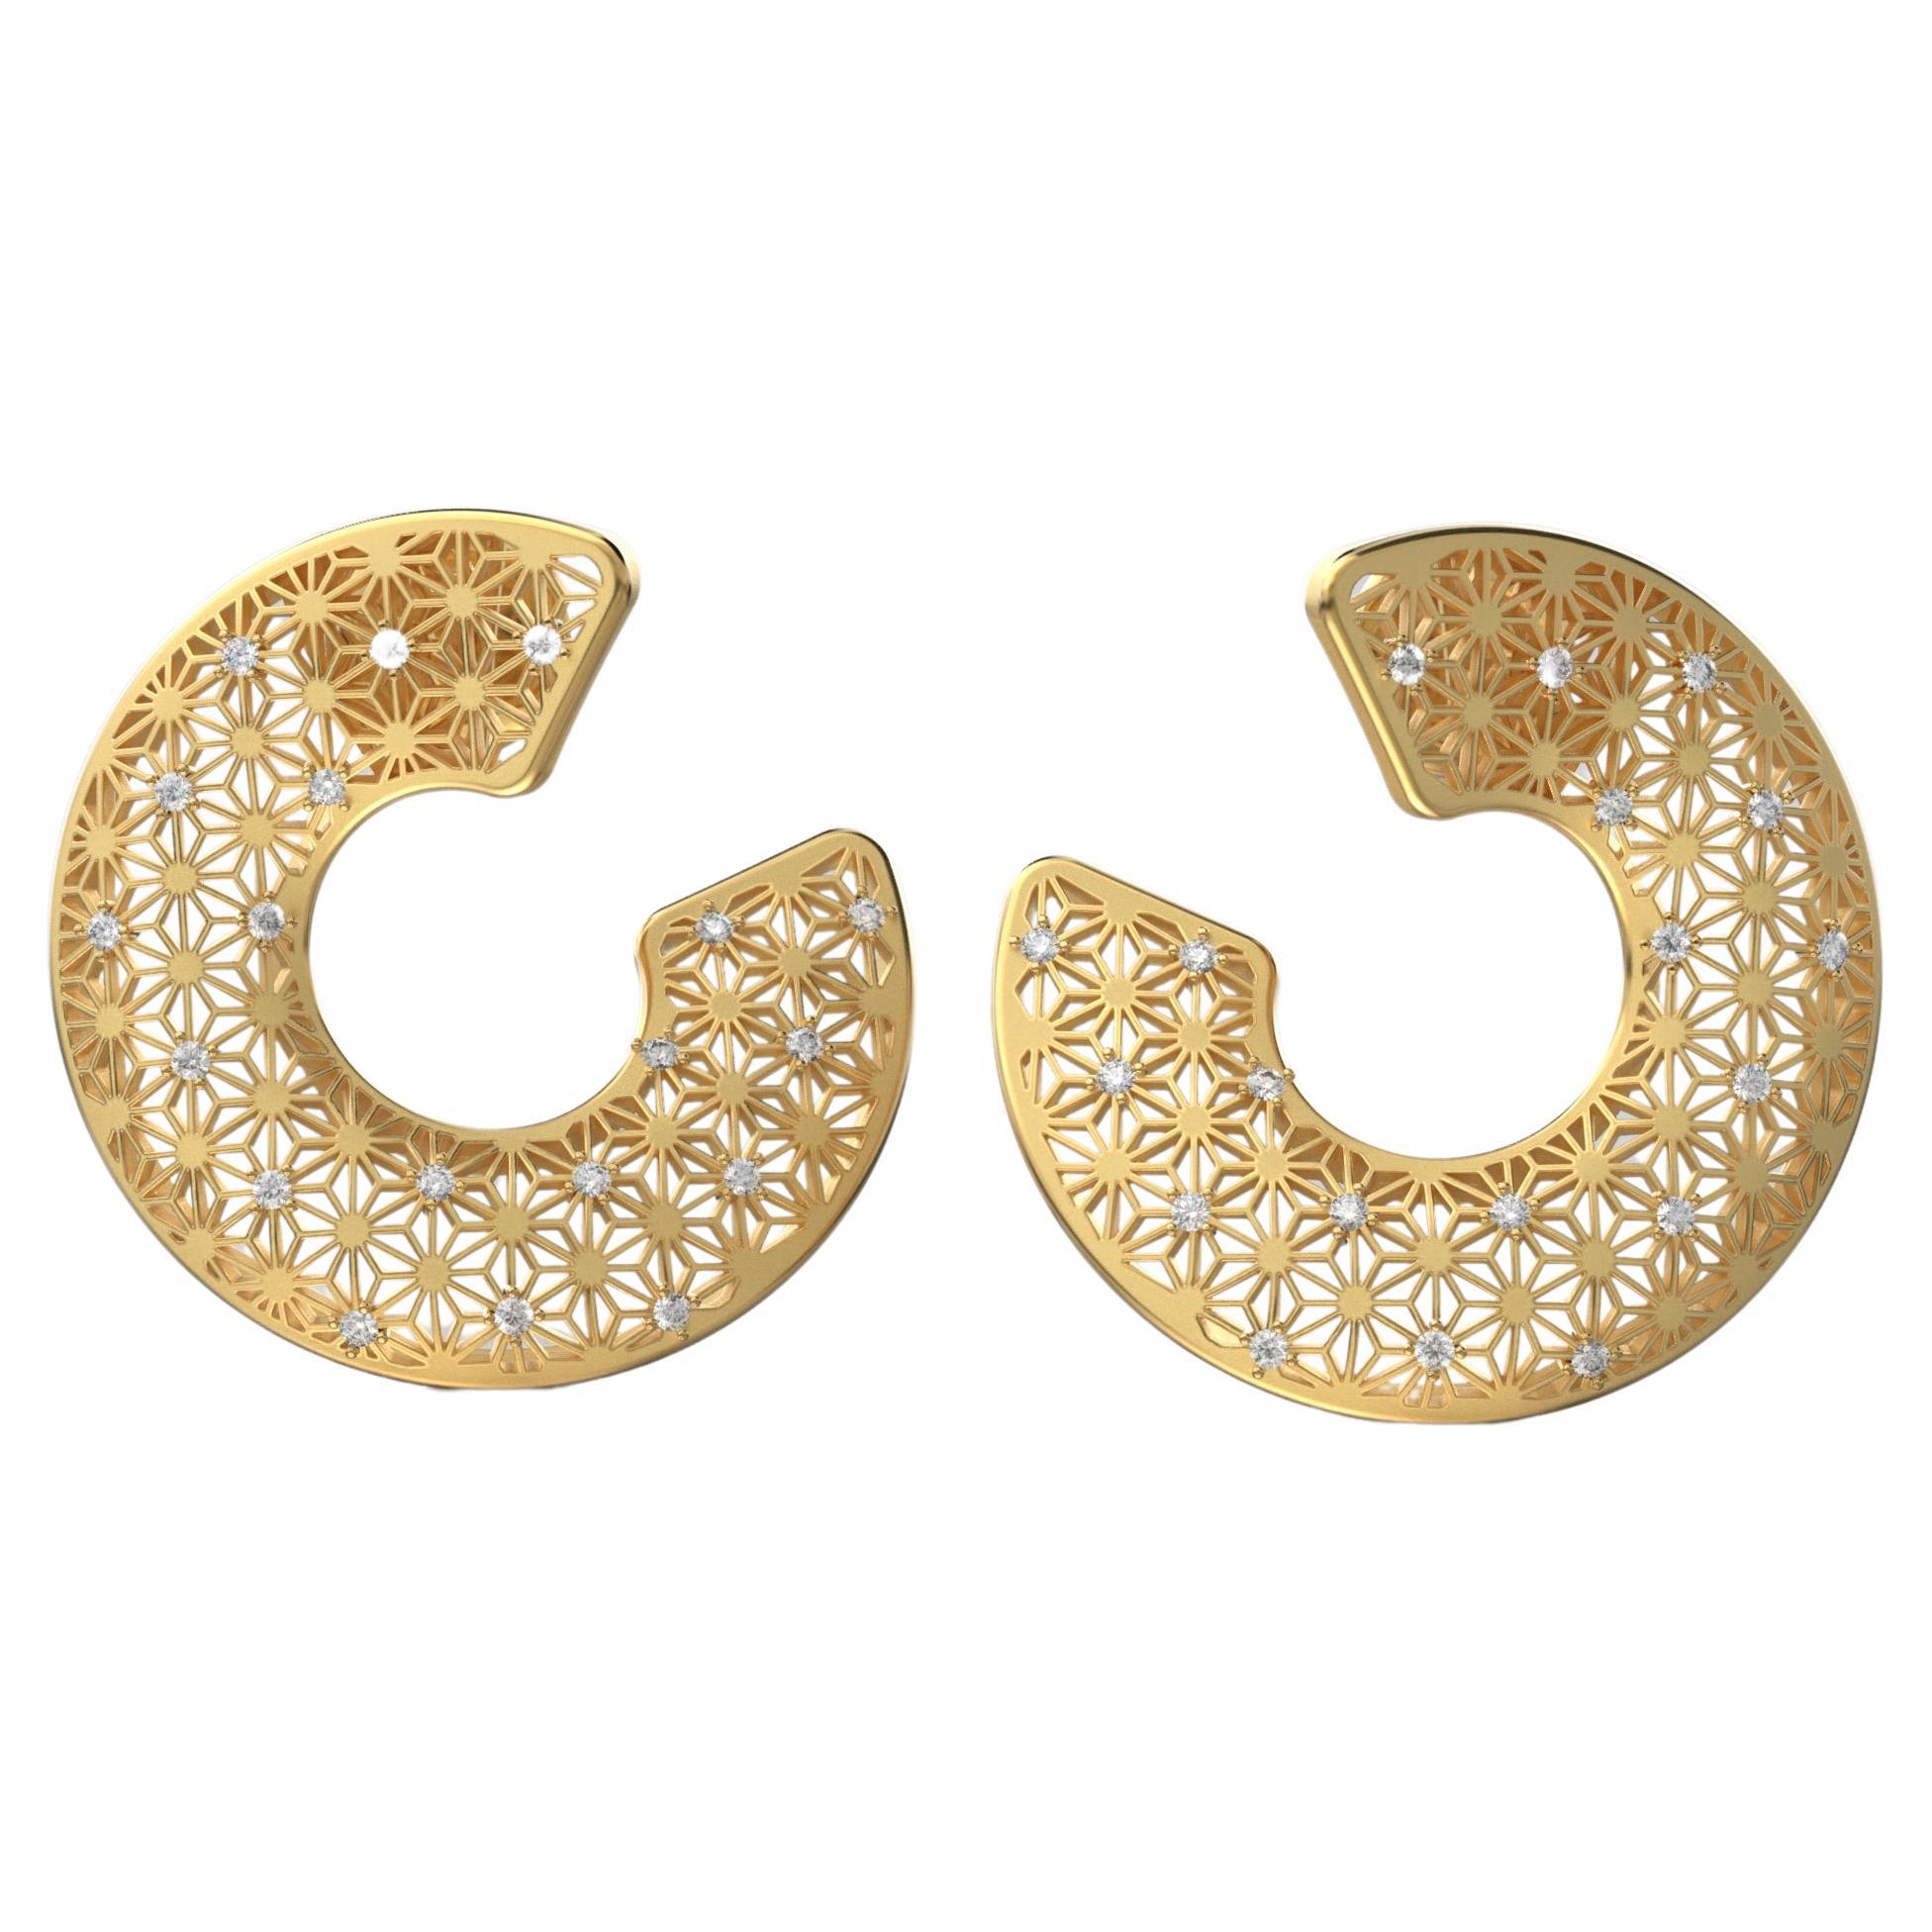 Stunning 18k Gold Diamond Earrings Made in Italy by Oltremare Gioielli For Sale